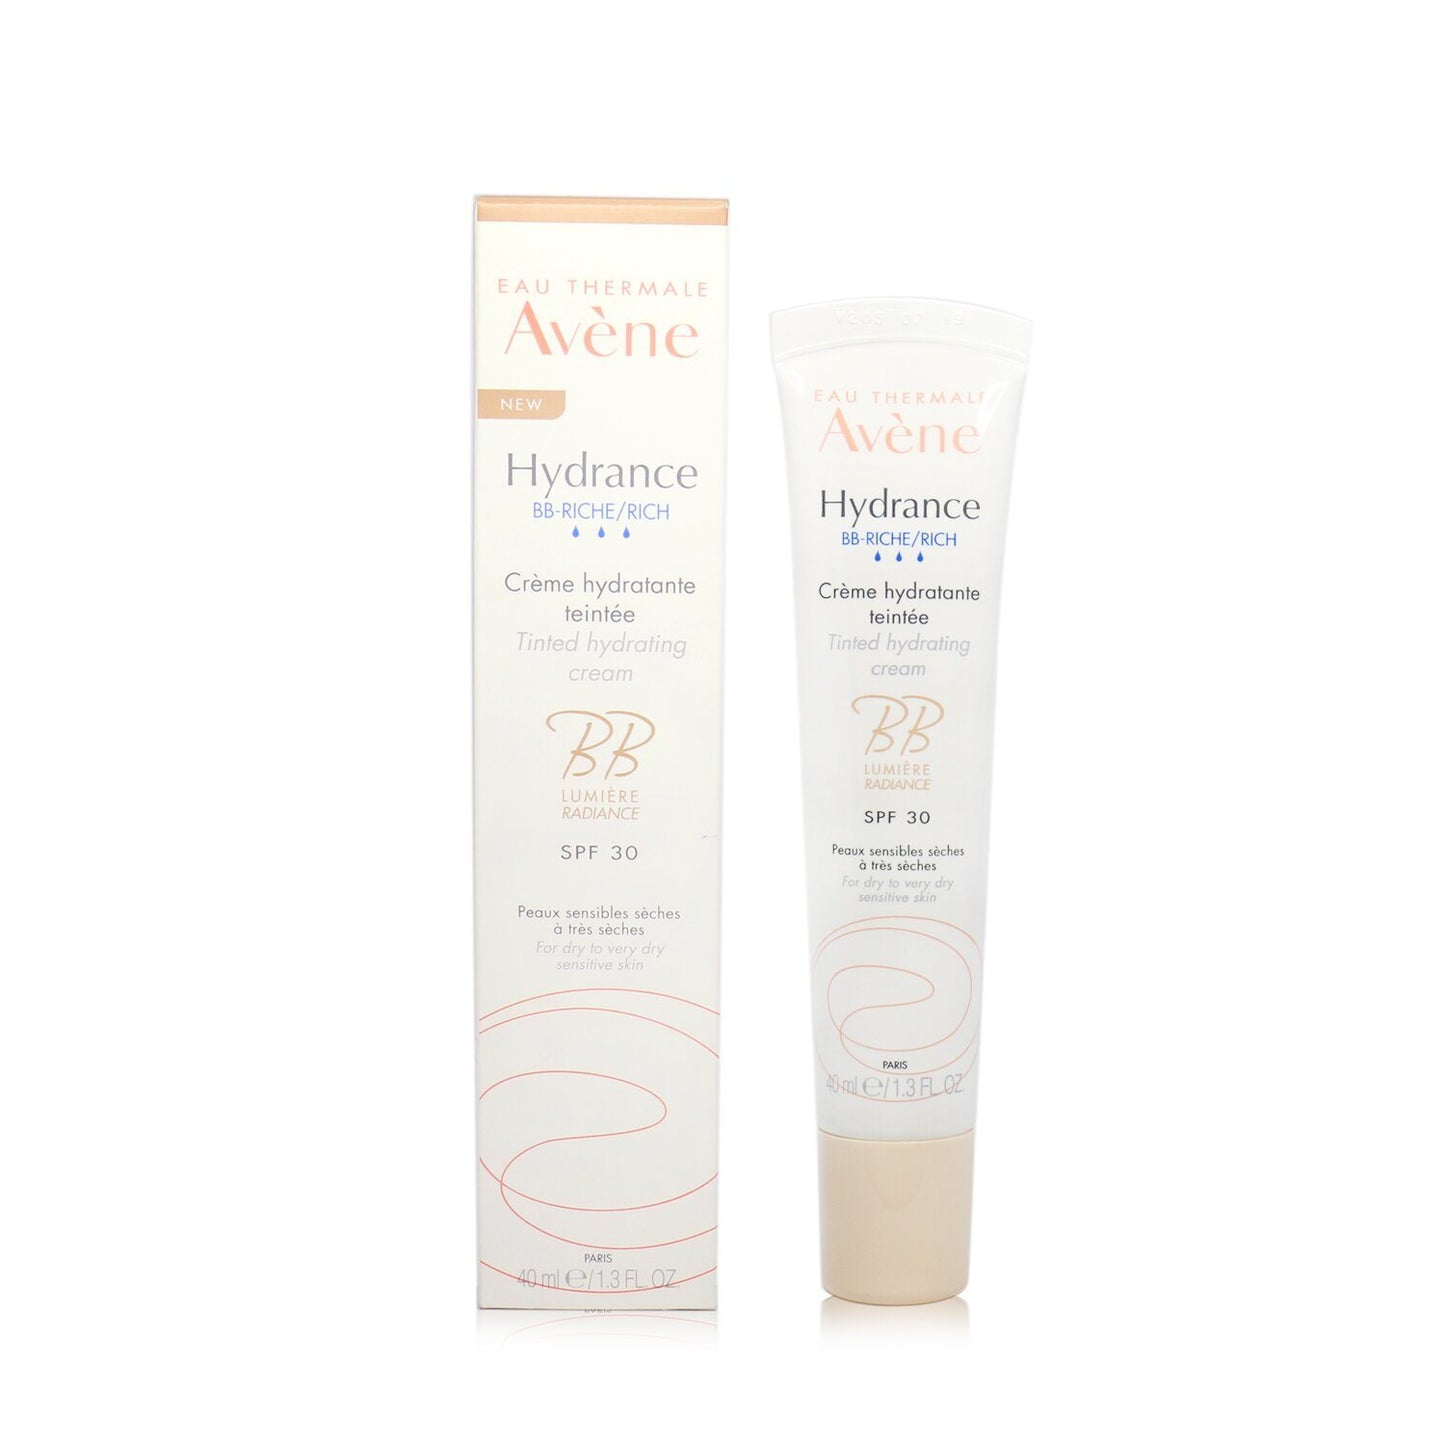 AVENE - Hydrance BB-RICH Tinted Hydrating Cream SPF 30 - For Dry to Very Dry Sensitive Skin 40ml/1.3oz